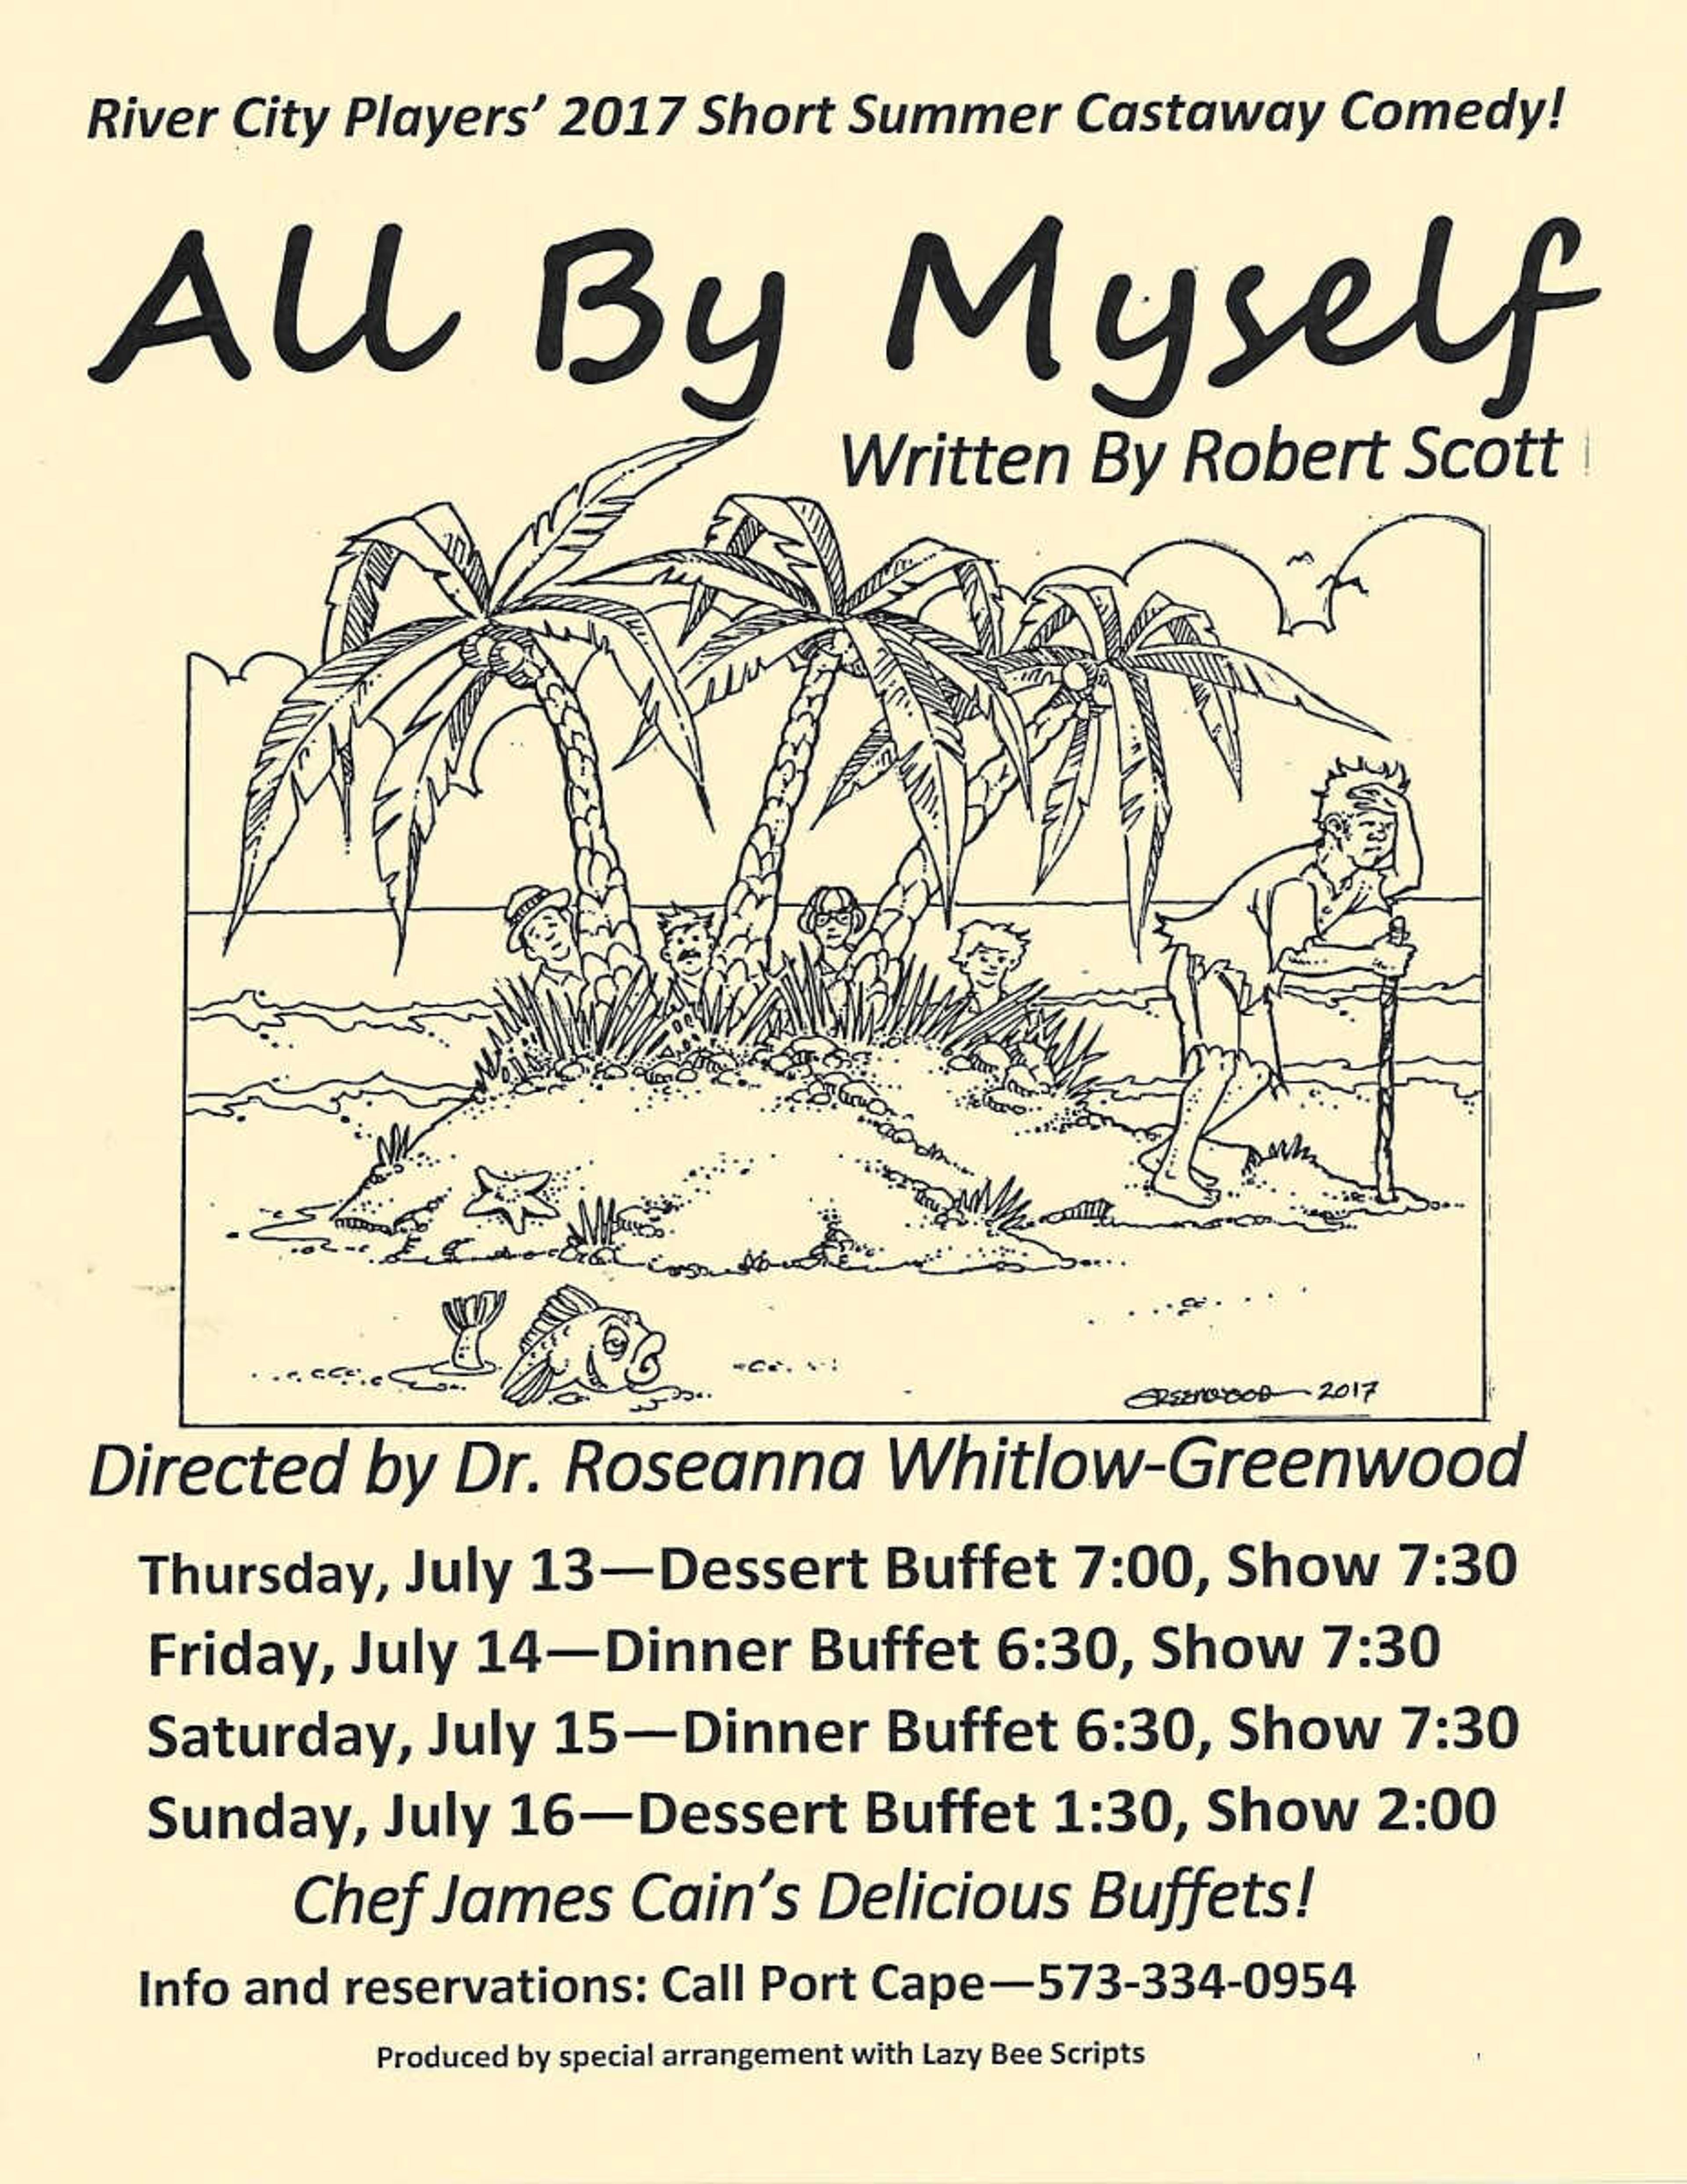 The River City Players will be performing a one-act comedy "All By Myself" July 13 - July 16, 2017.